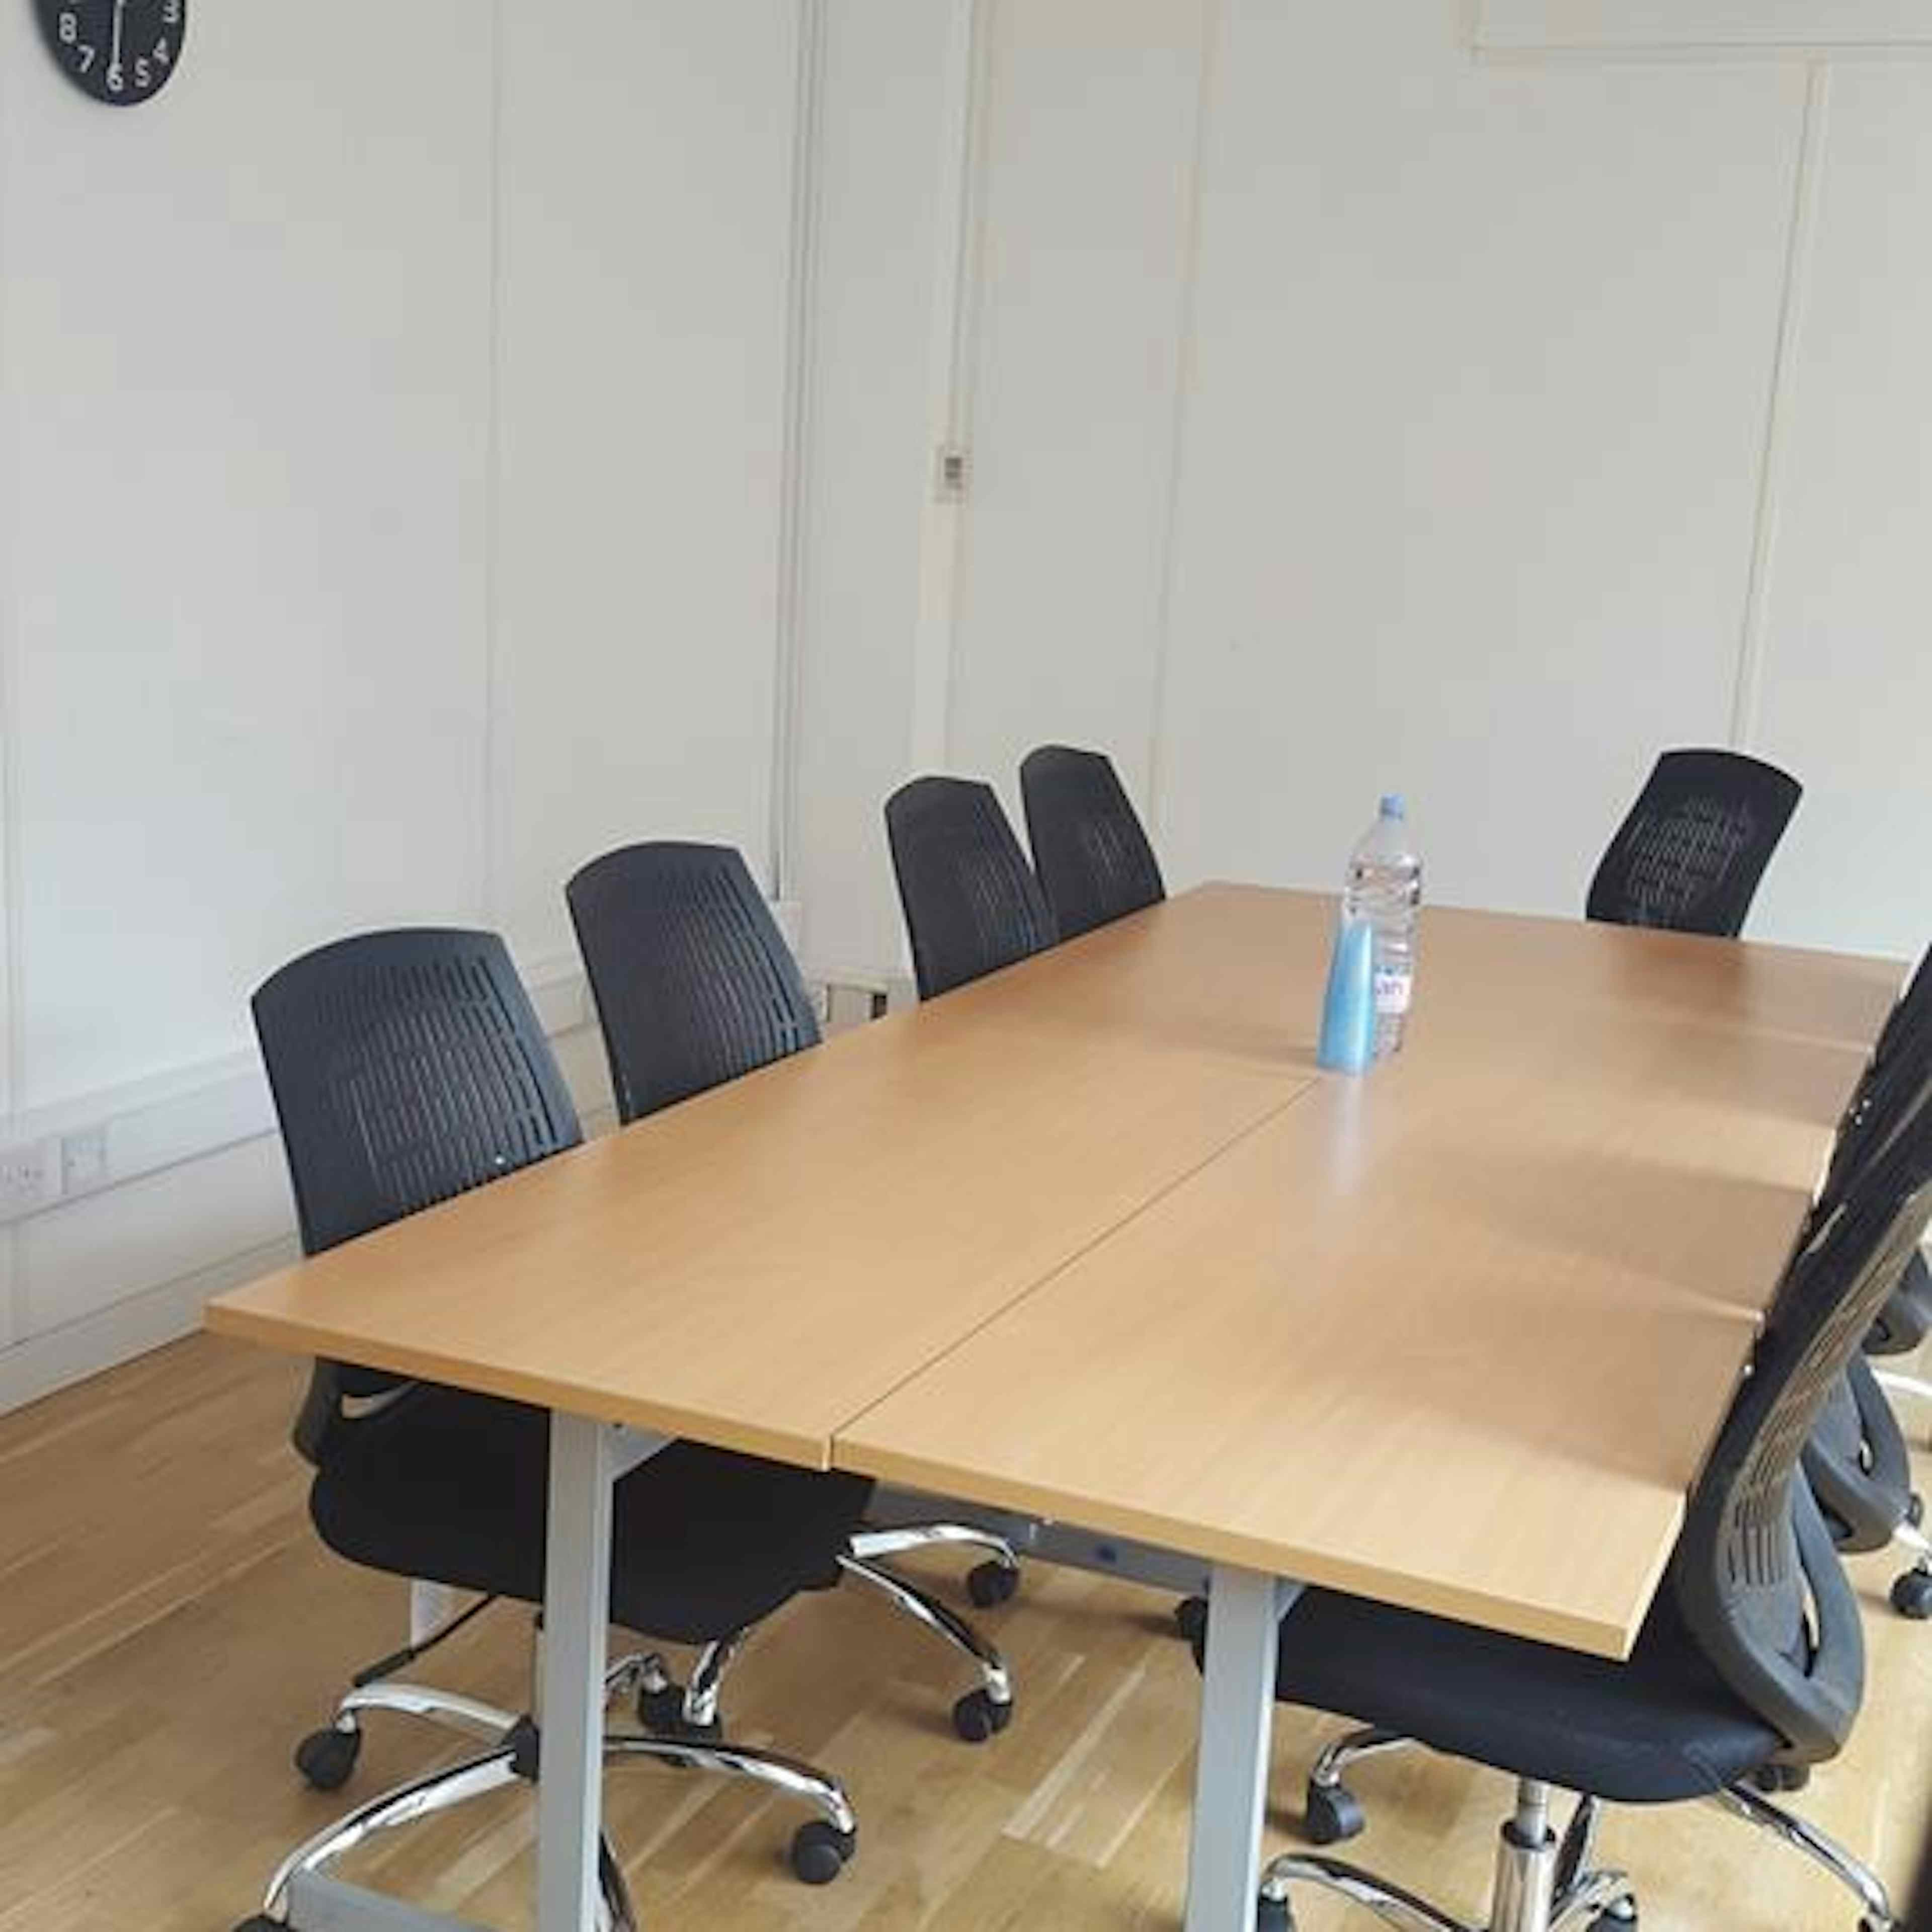 The Training Room Hire Company - Conference / Meeting Room (Medium) image 3